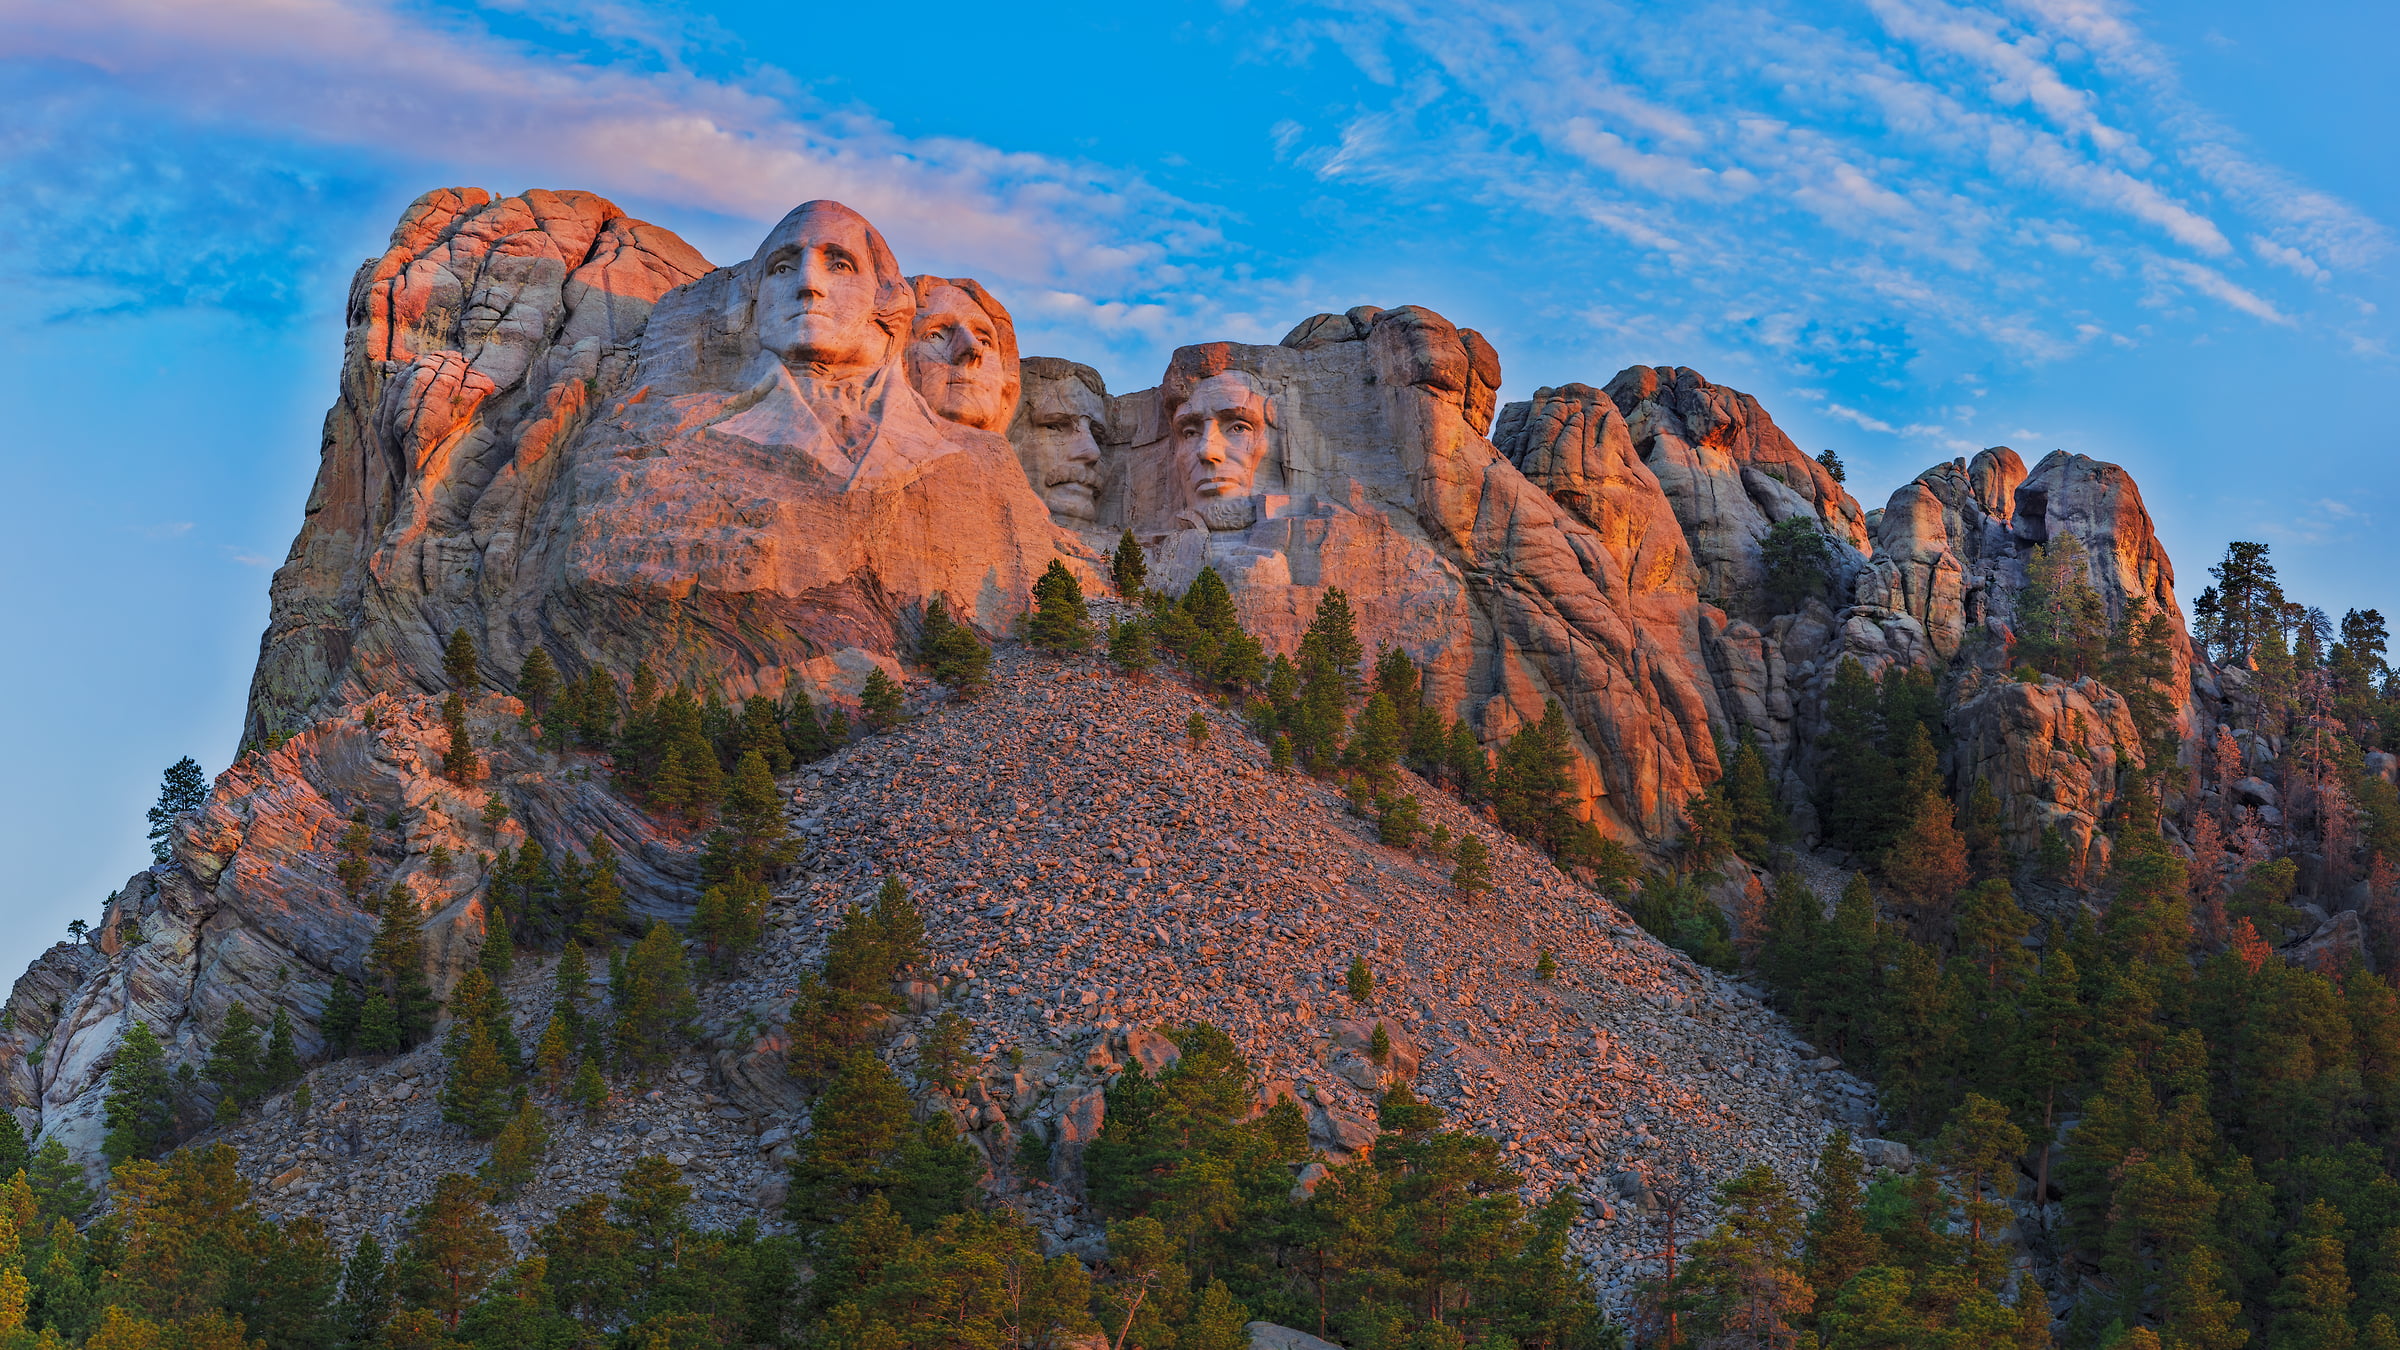 1,485 megapixels! A very high resolution, large-format VAST photo print of Mount Rushmore at sunrise; landscape photograph created by John Freeman in Mount Rushmore National Memorial, South Dakota